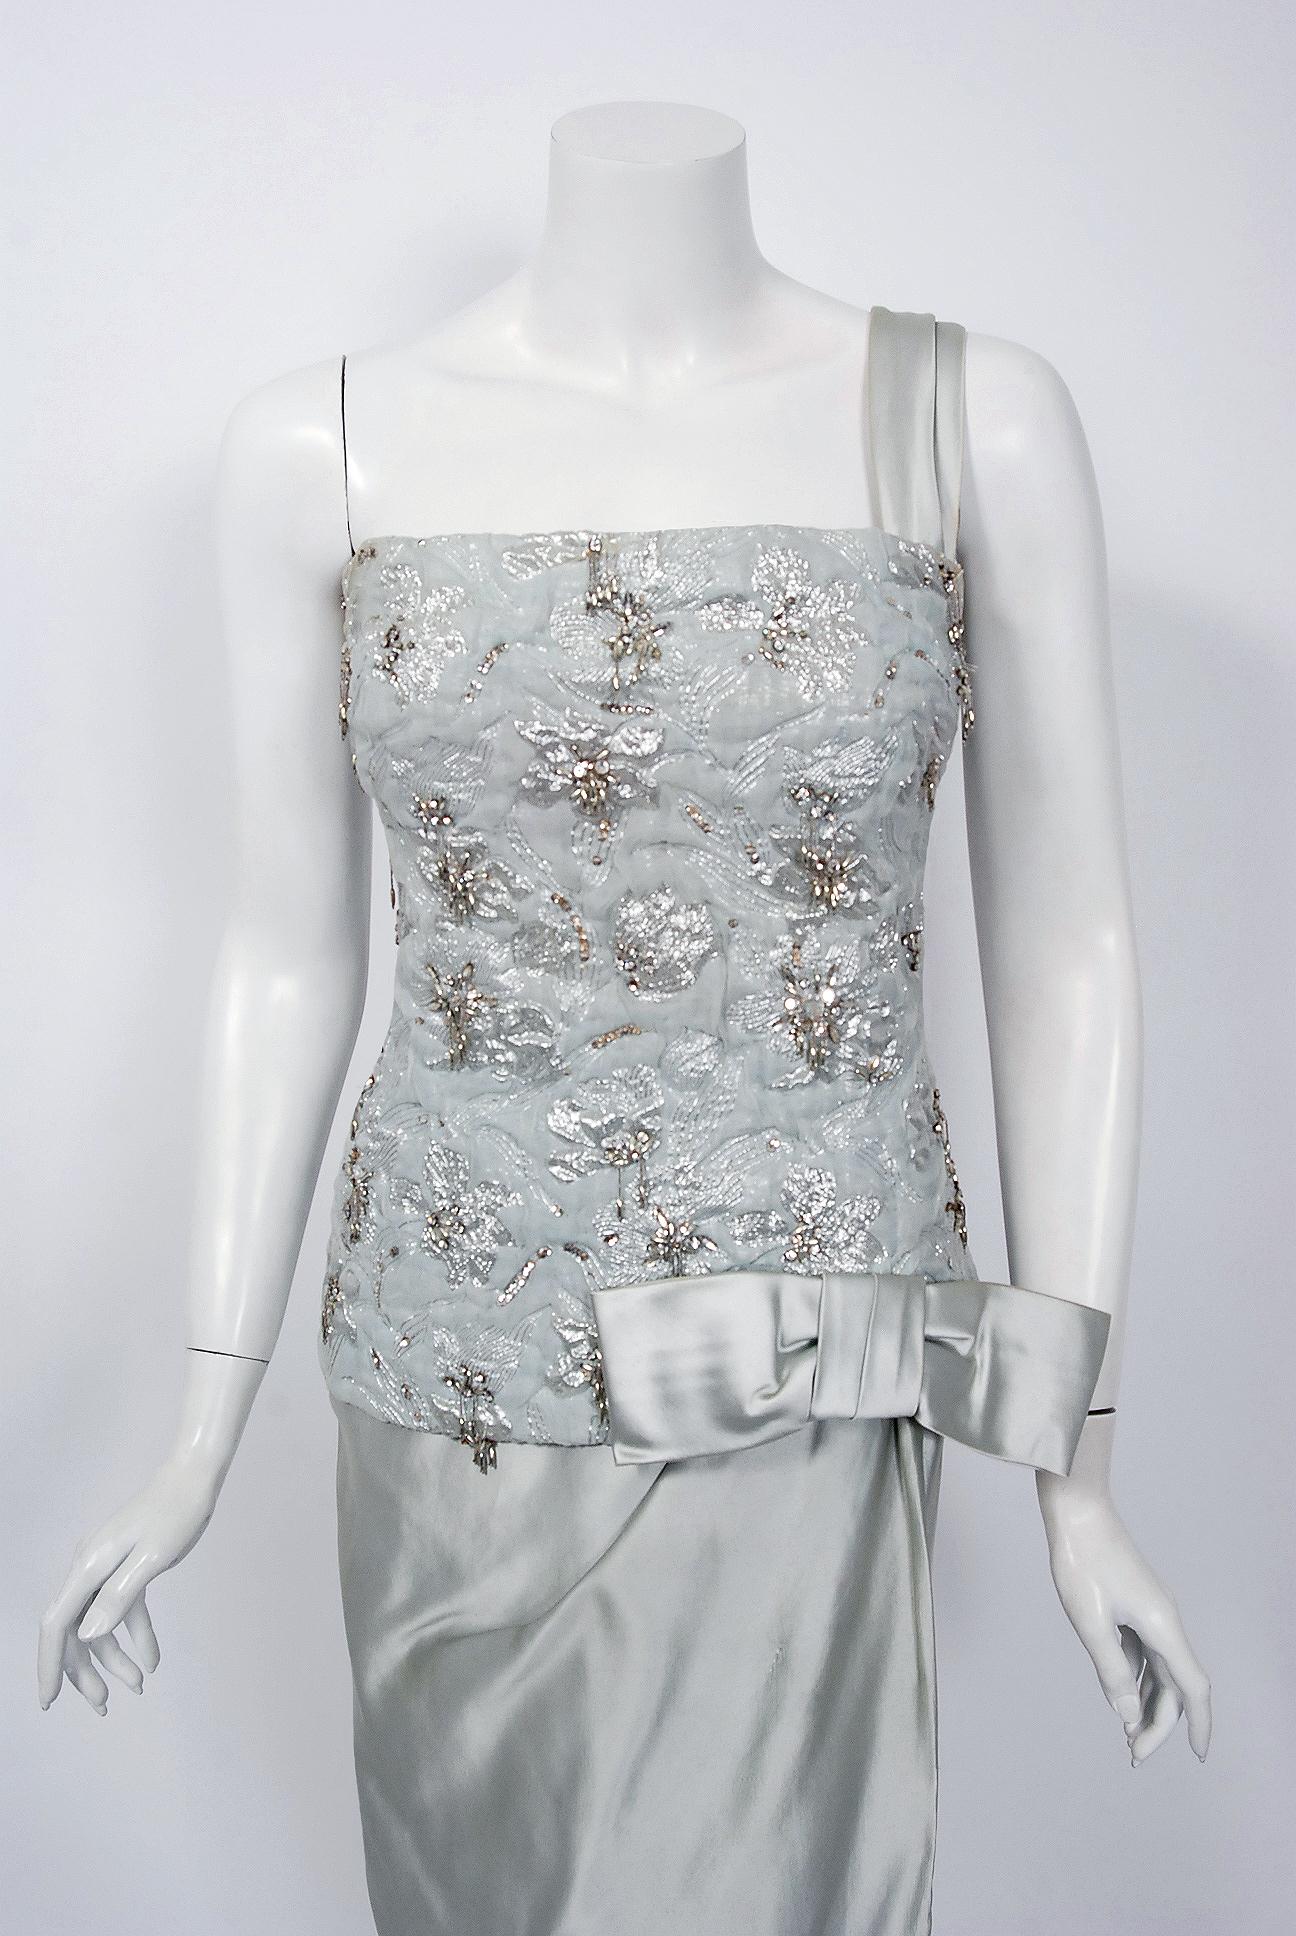 Beautiful ice-blue beaded metallic silk and satin gown by the famous House of Maggy Rouff. This gorgeous garment dates back to their 1955 haute couture collection. Harmony and simplicity were cornerstones of Maggy Rouff's belief in elegance as a way